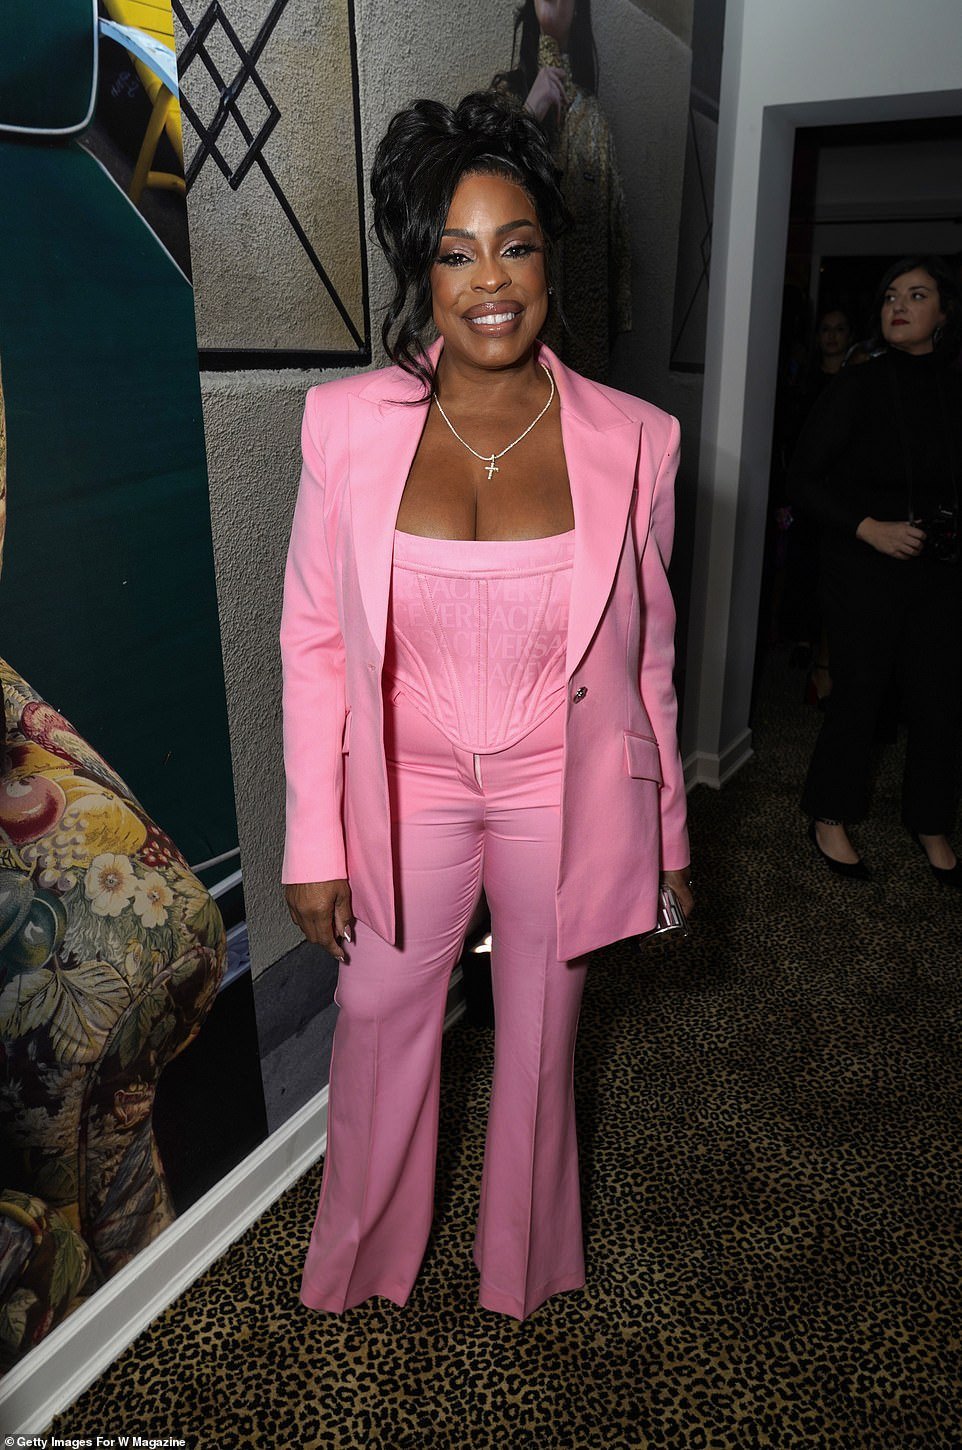 Niecy Nash-Betts radiated effortlessly in pink trousers, a fitted corset top and a matching blazer